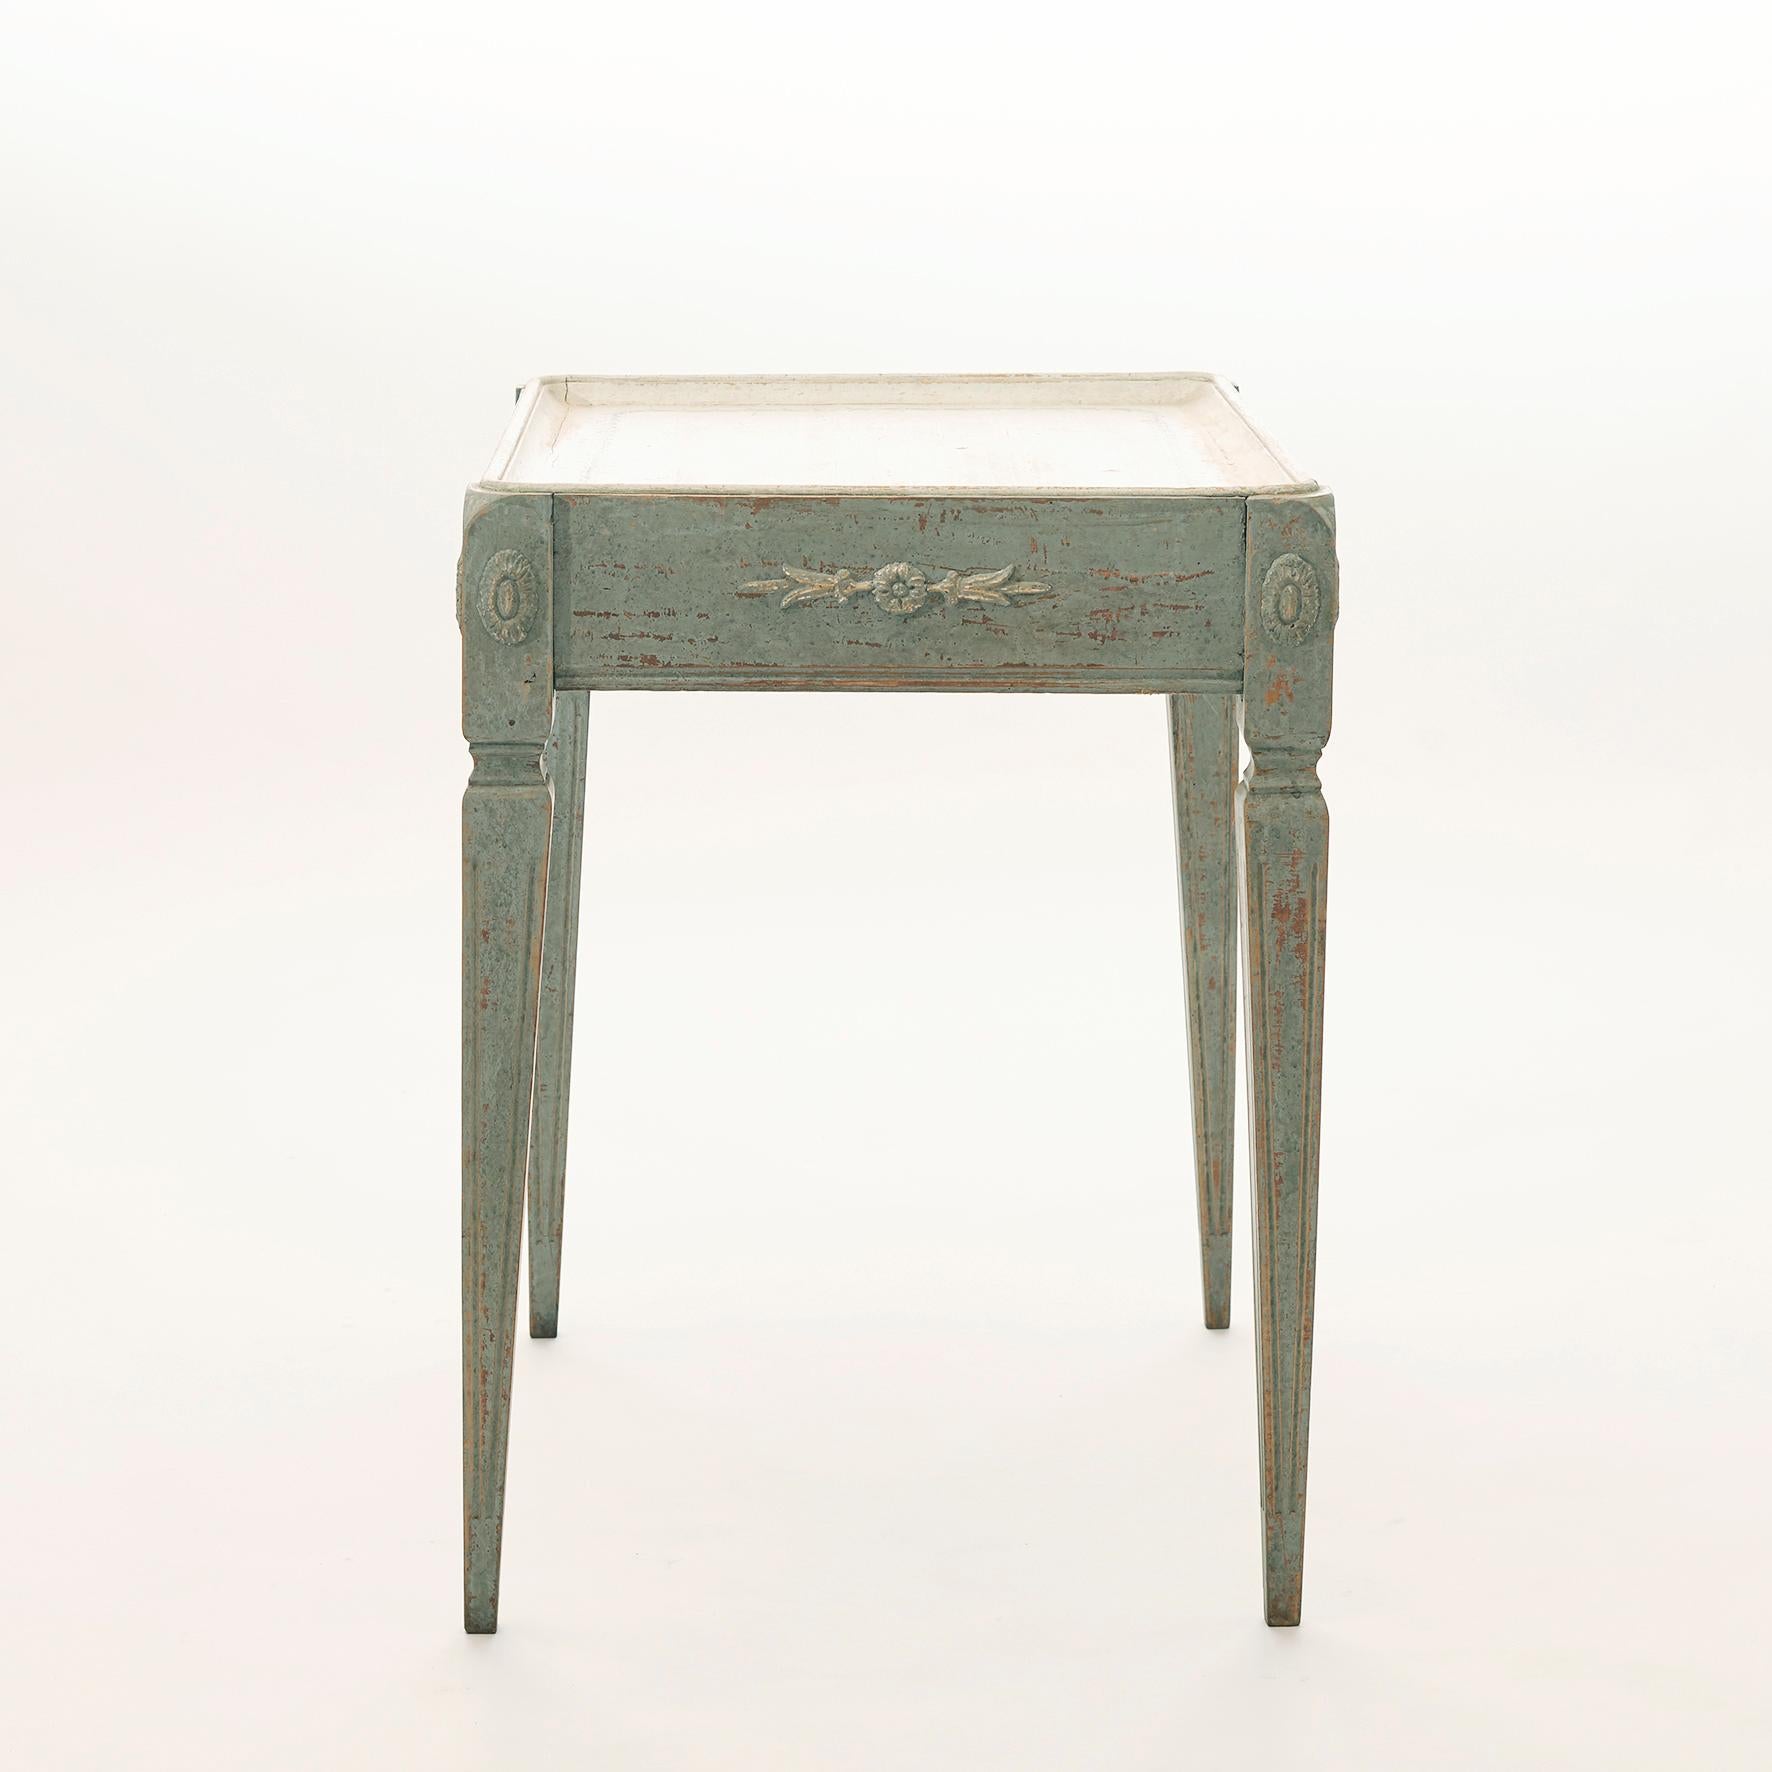 Painted Charming 19th Century Swedish Gustavian Style Tray-Table